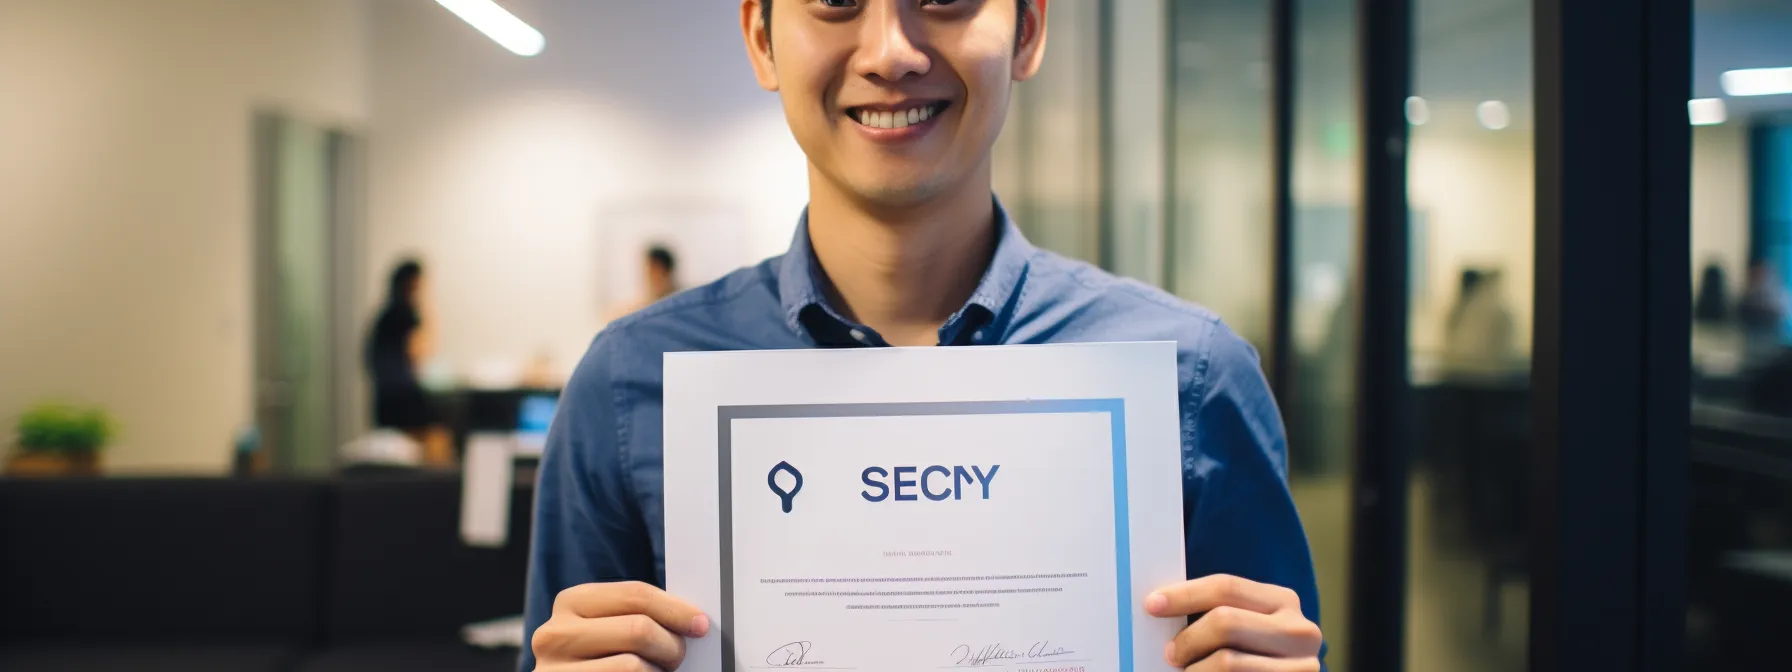 a person proudly holding an seo certification from seotheory, representing their proficiency in digital marketing and opening doors to career advancement.